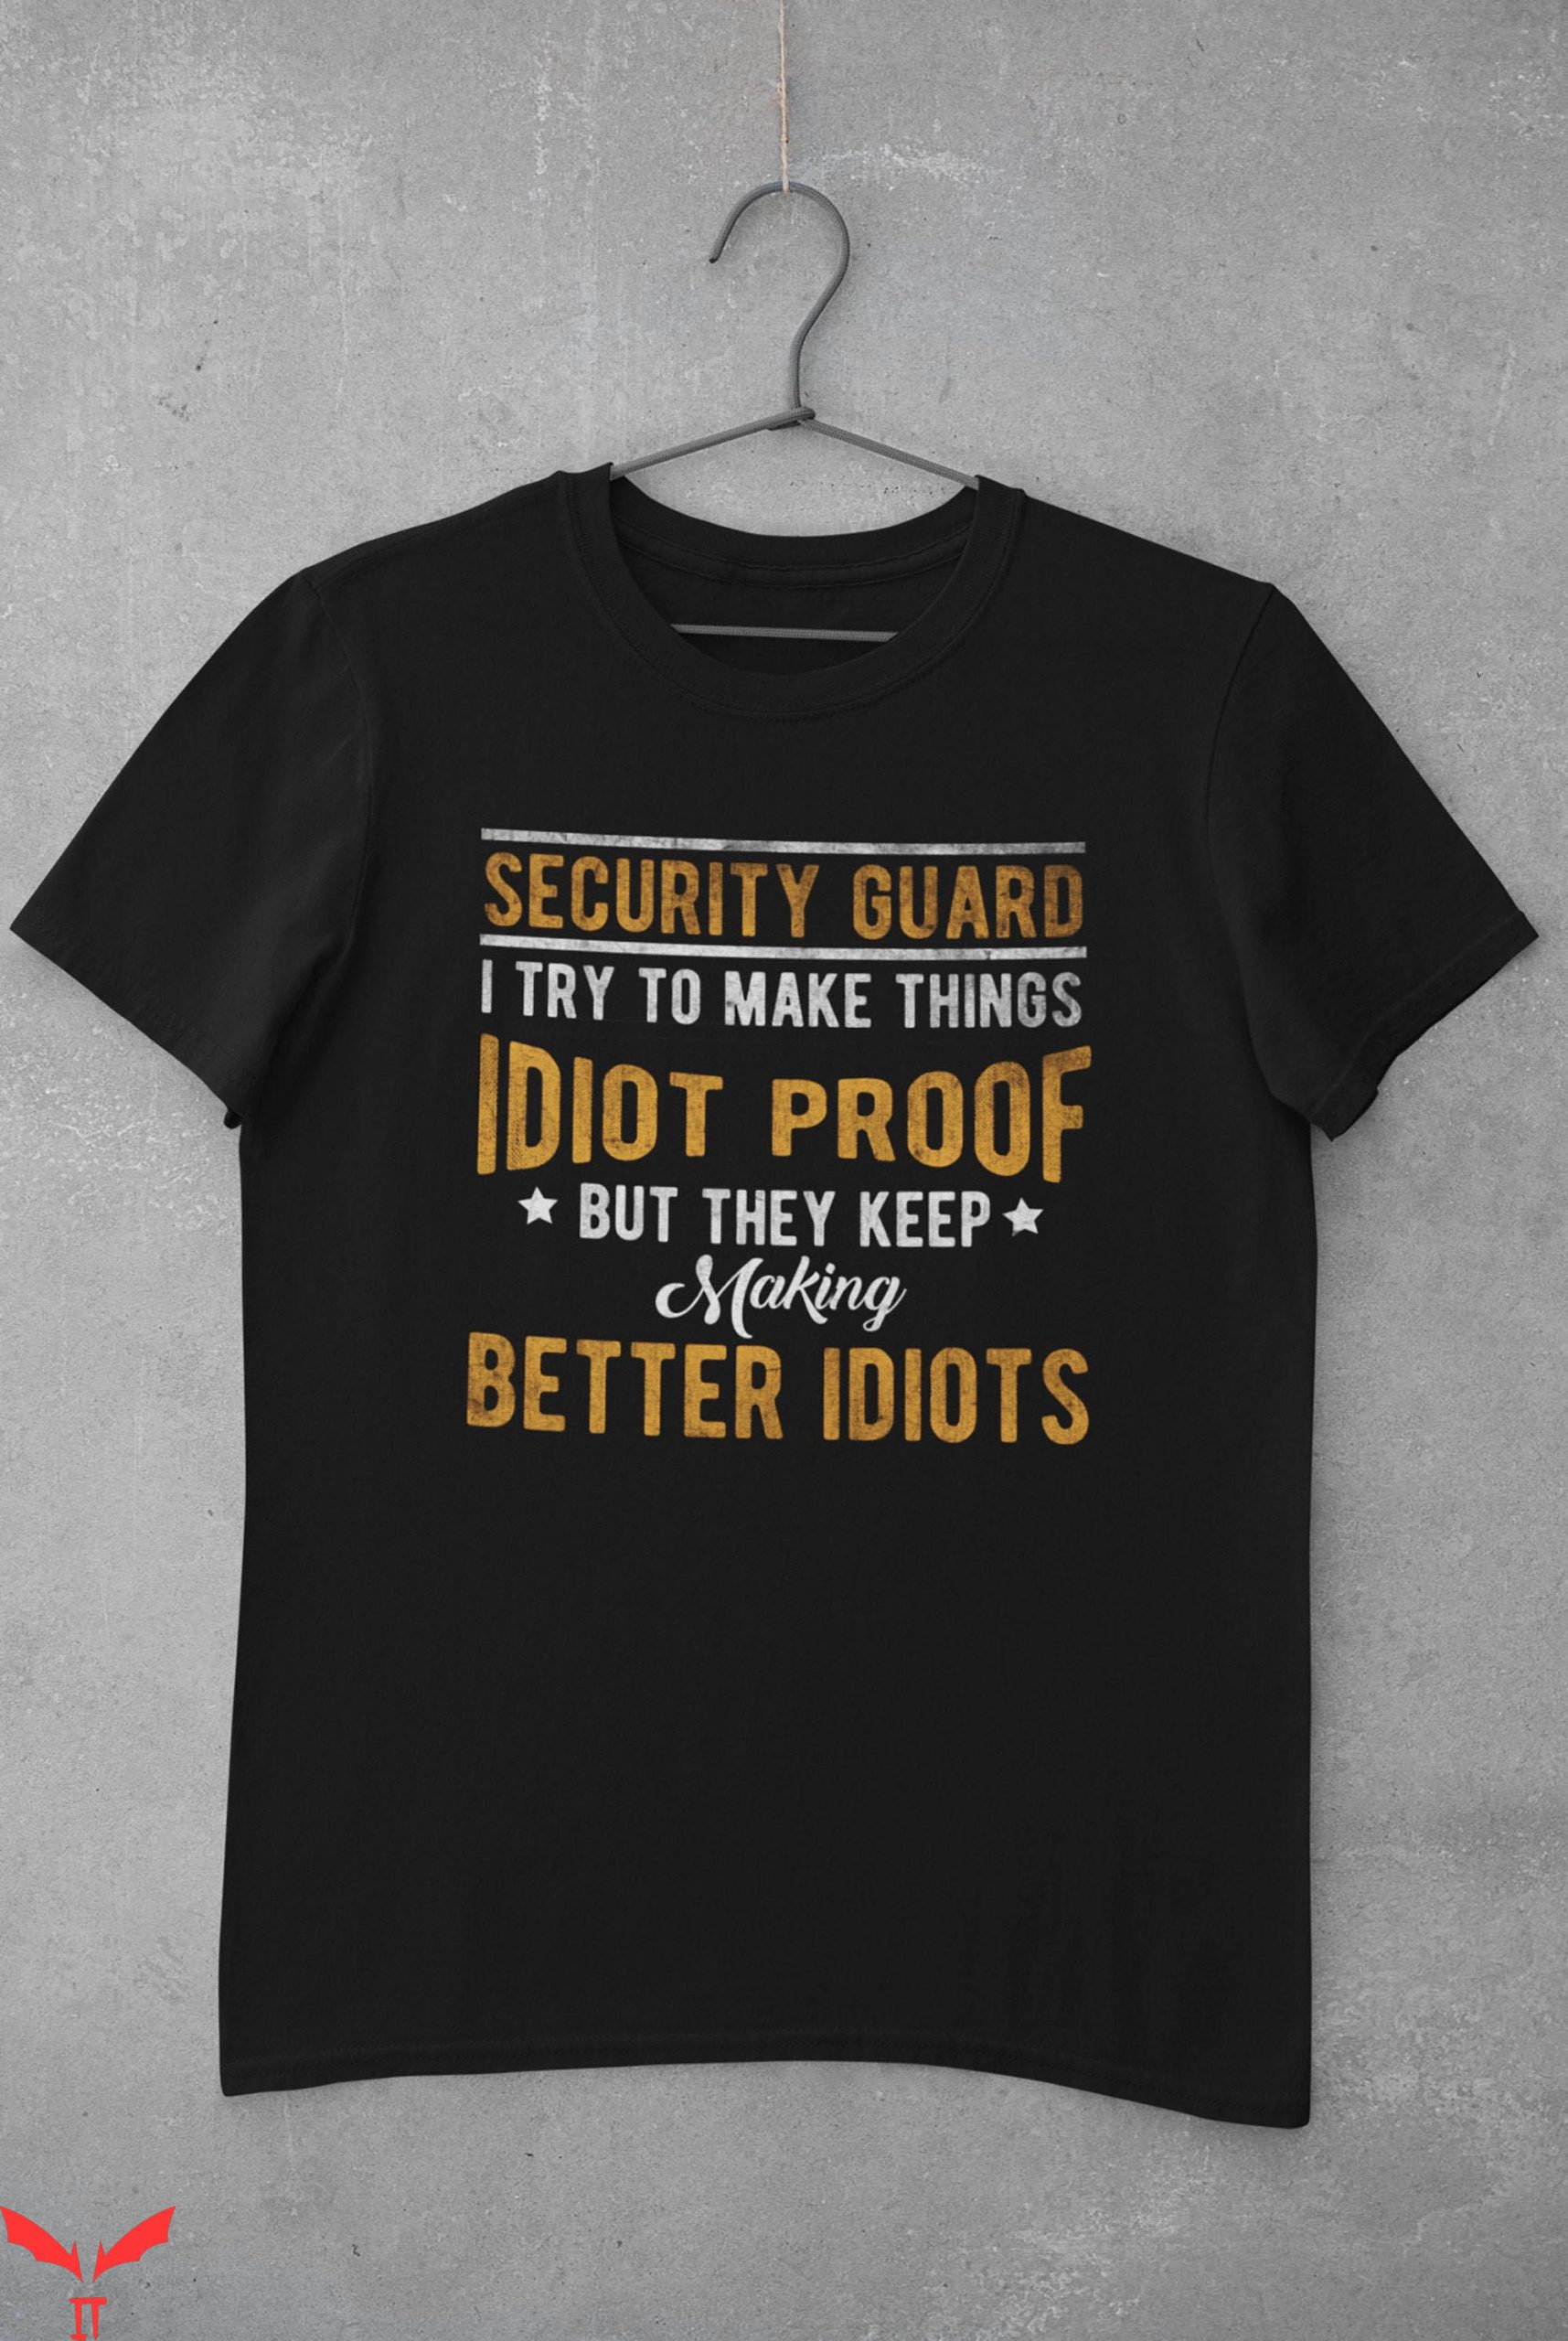 Security T-Shirt Security Guard Sarcastic Funny Quote